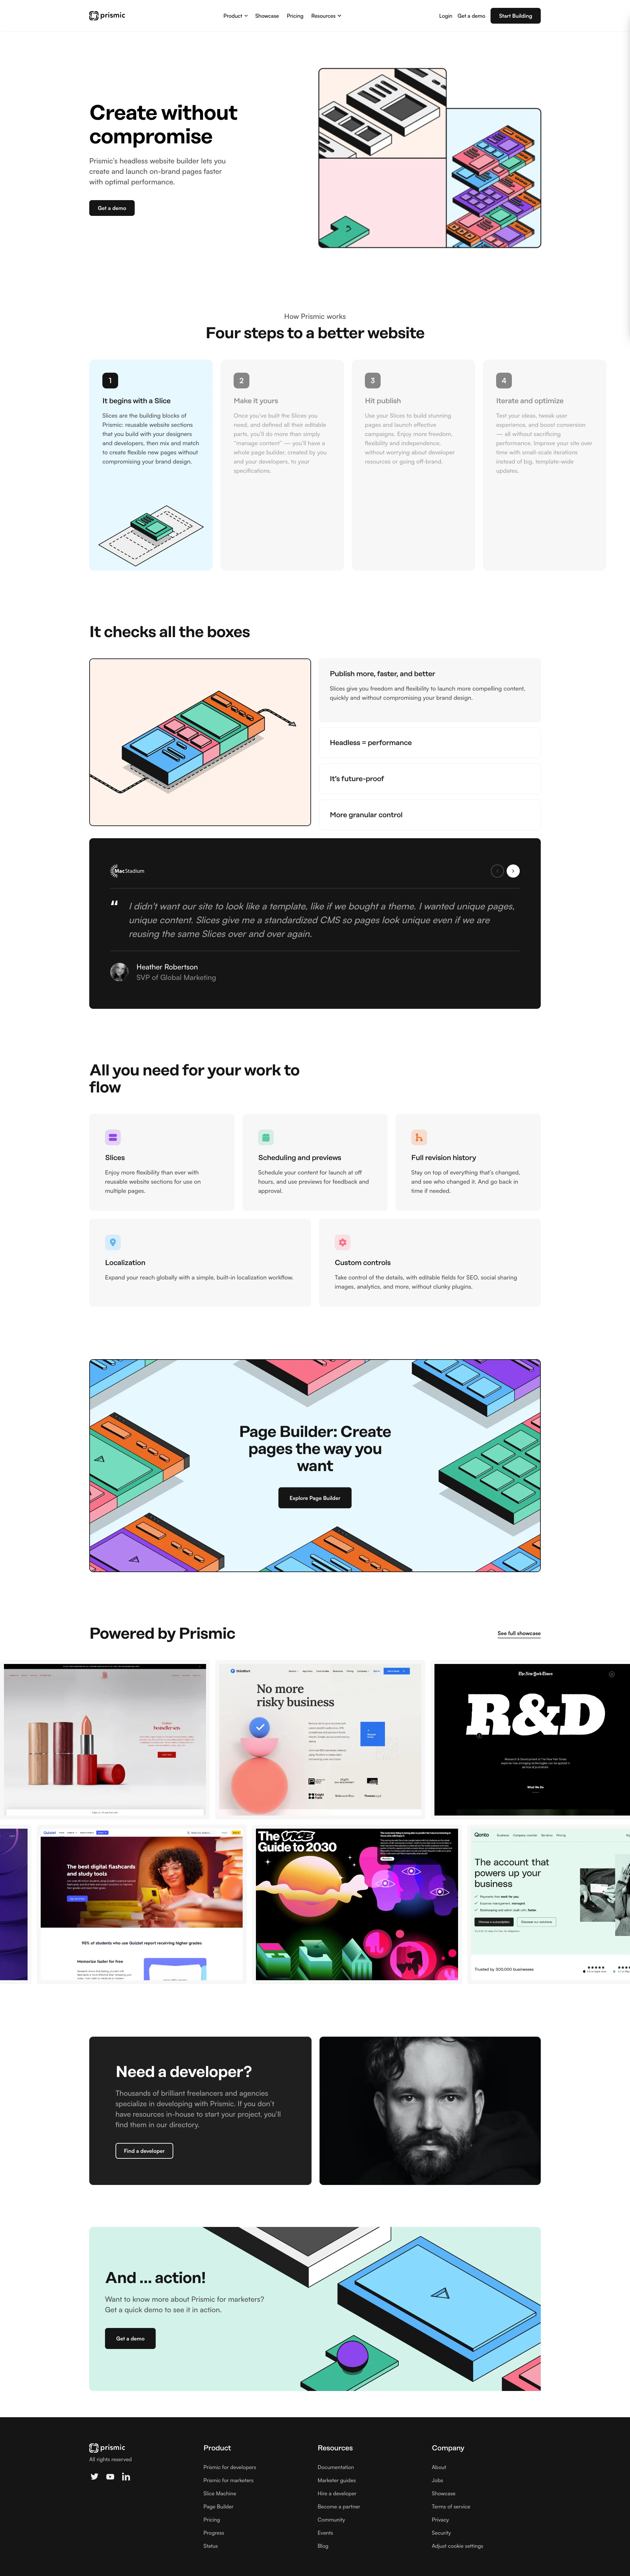 Prismic Landing Page Example: From website to growth engine. Prismic is the headless website builder that lets developers and marketers ship and iterate faster, and build sites that just keep getting better.